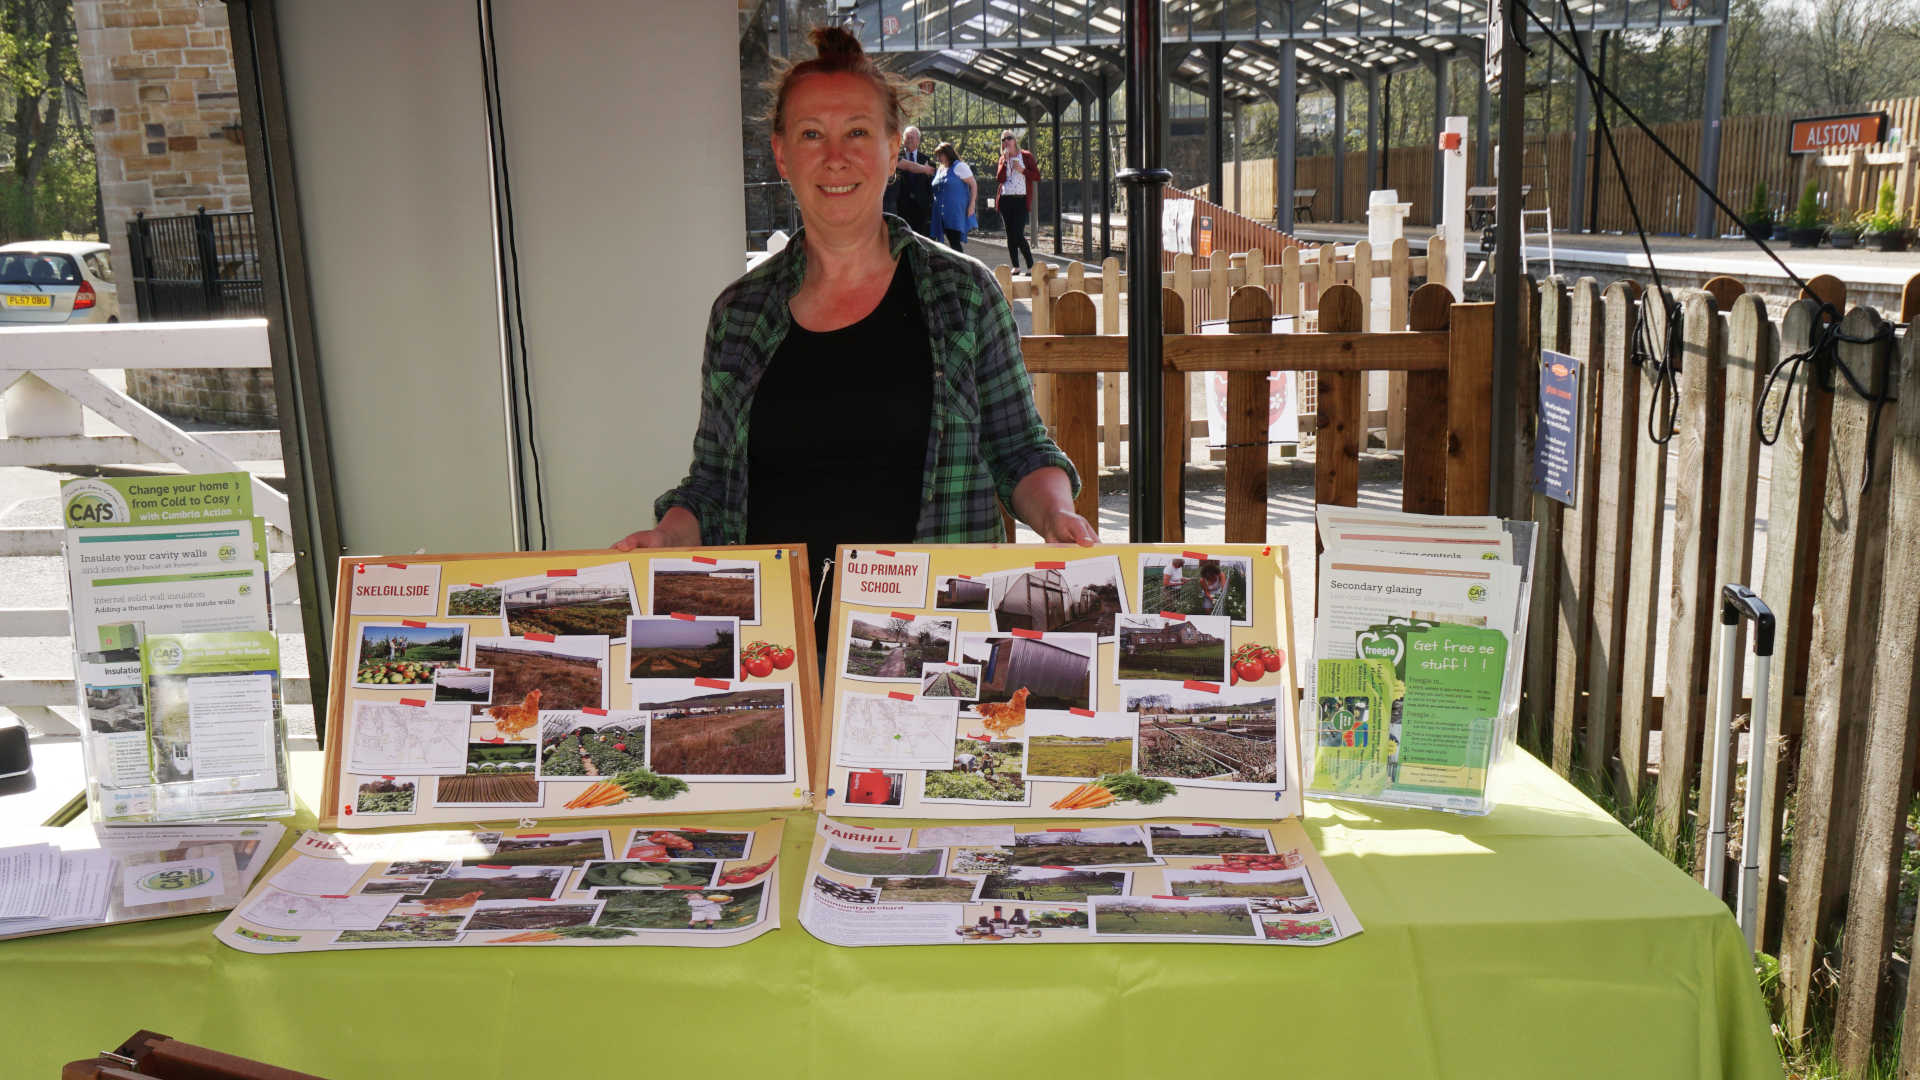 Roe Baker from CAfS running a stall at South Tynedale Railway Earth Day showing photos of options for food growing on Alston Moor